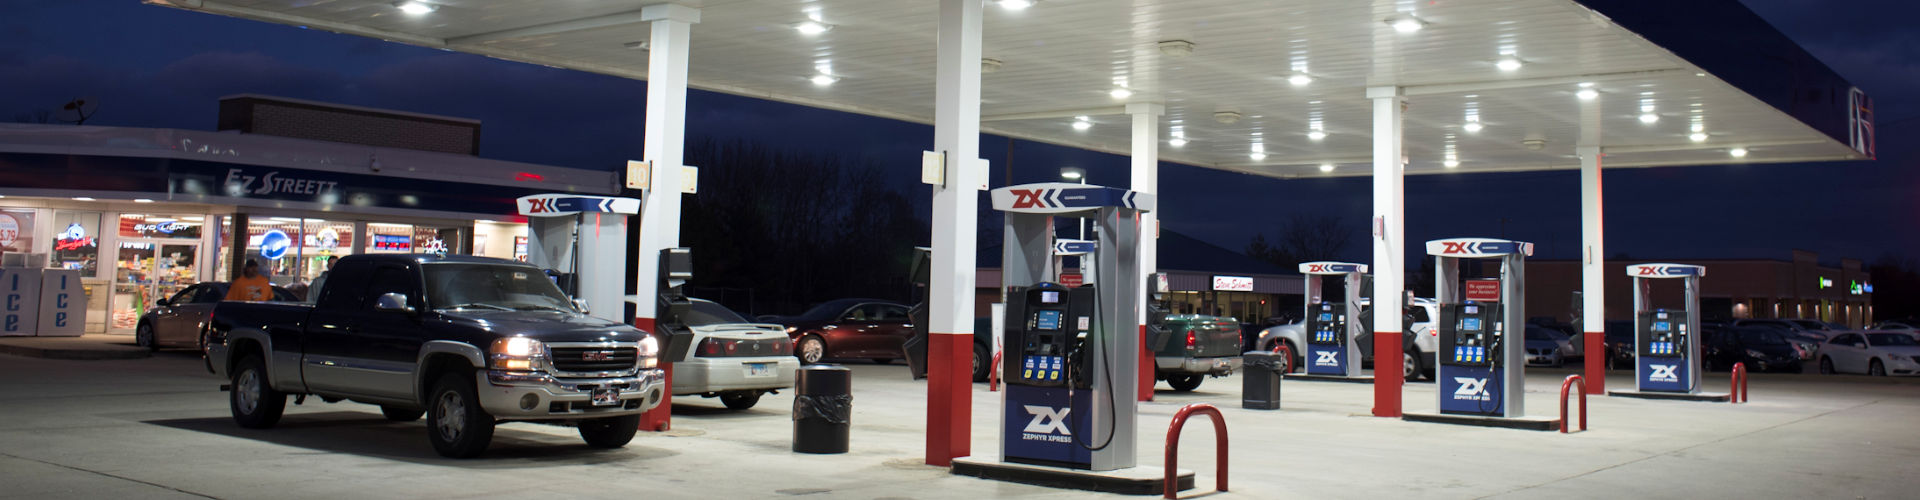 zx-gas-station-store-night